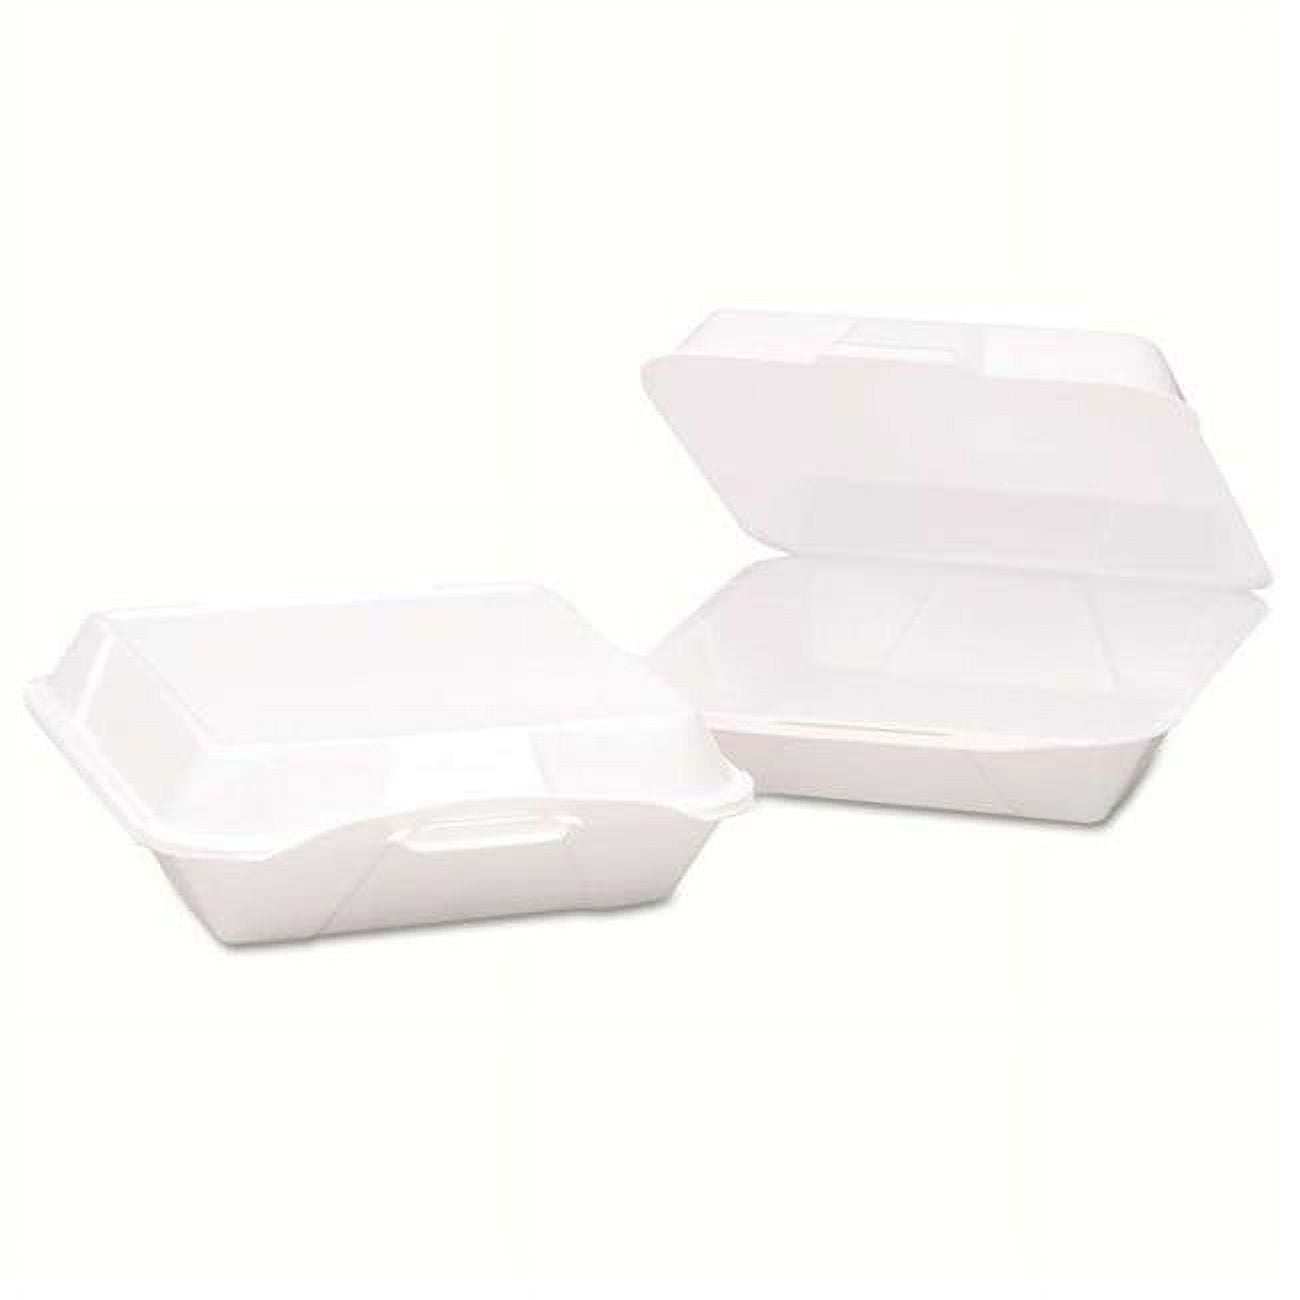 20500-v Cpc Large Deep Foam Hinged Container, White - Case Of 200